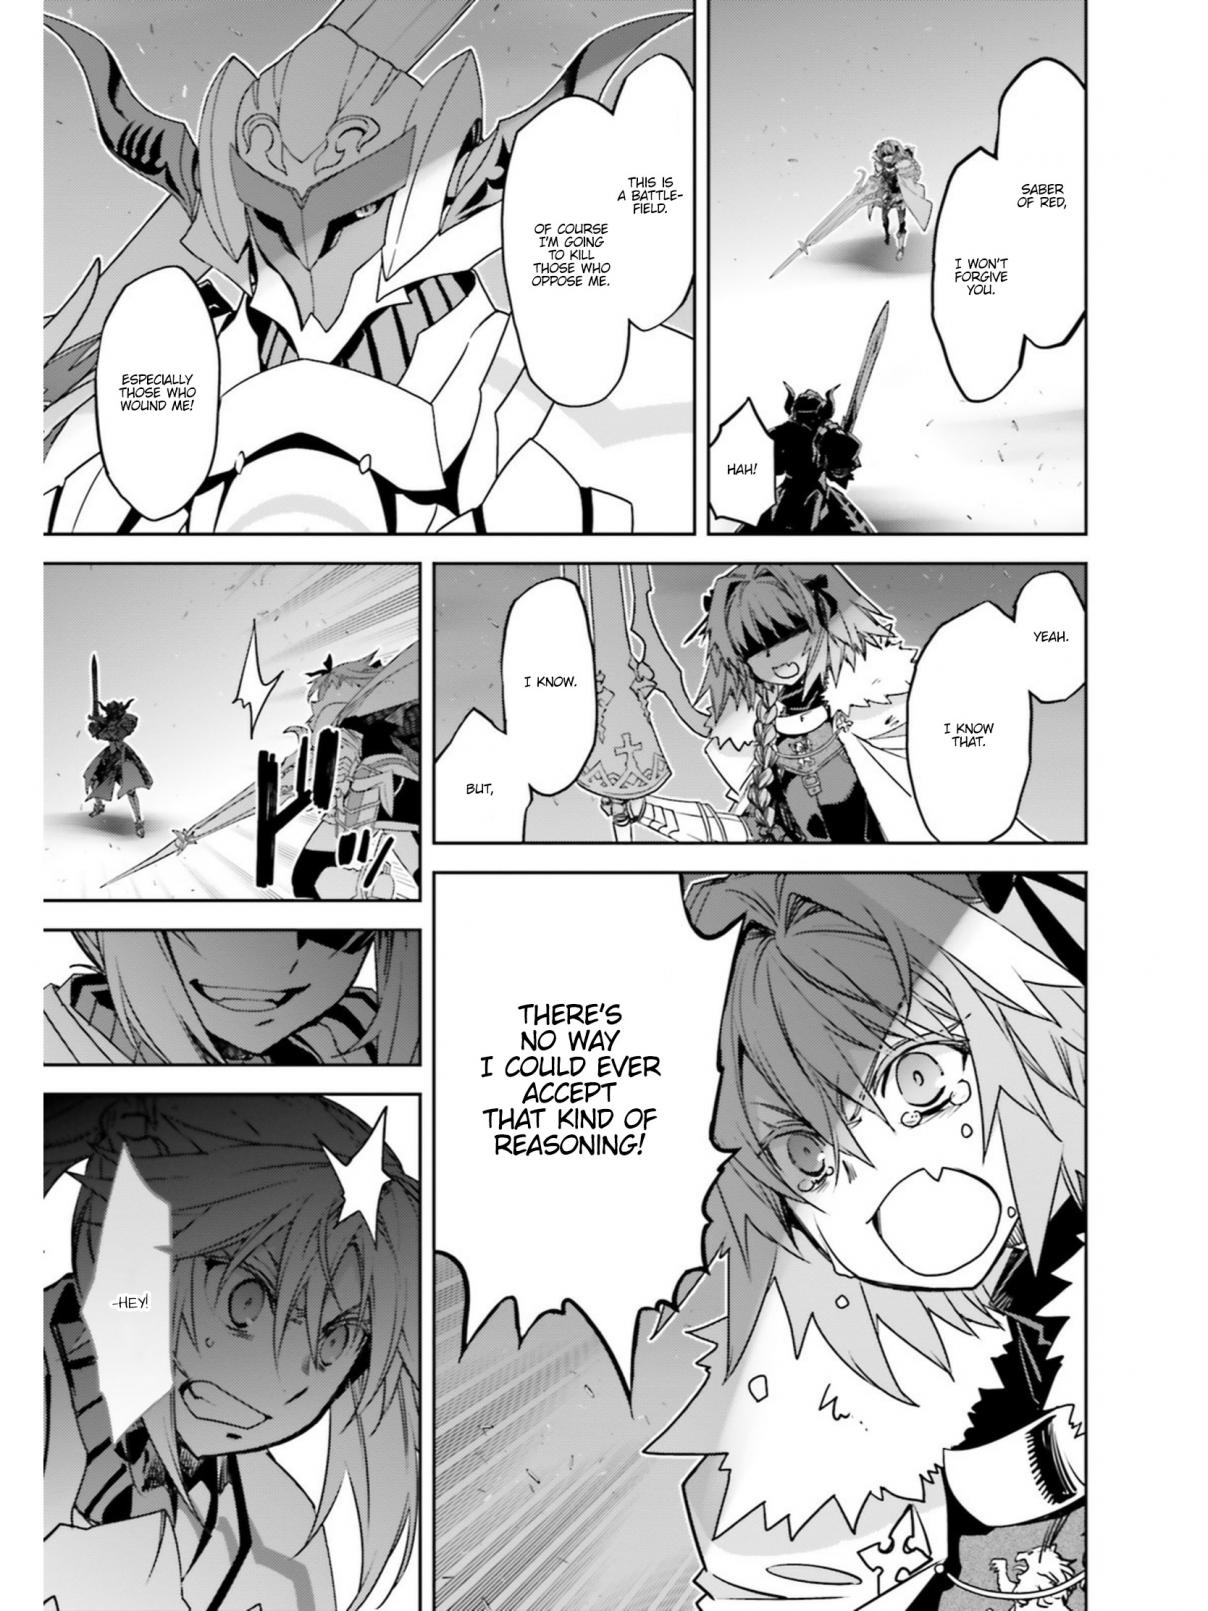 Fate/Apocrypha Ch. 24 Episode